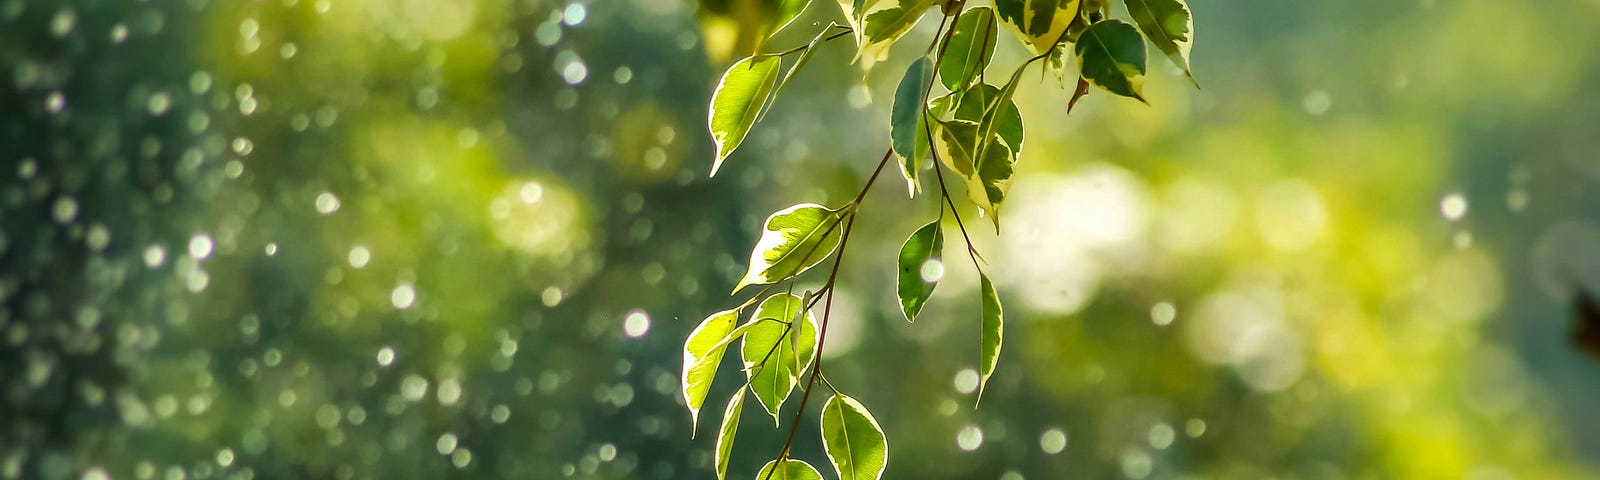 blurry green background with circles of light and close up of leaves from a tree branch. the sun is in the distance- a beautiful nature scene